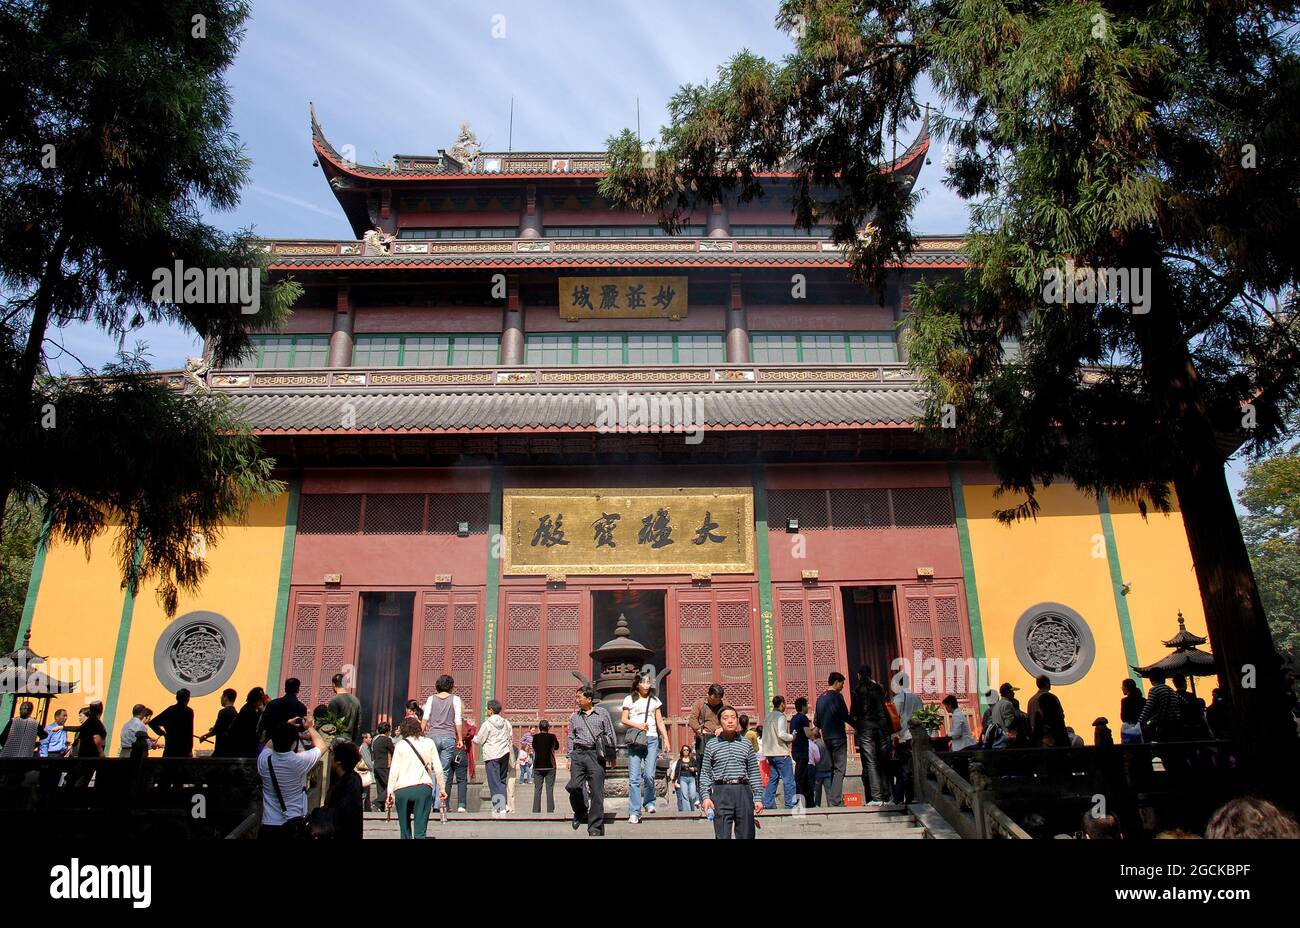 Lingyin Temple also known as the Temple of the Soul's Retreat in Hangzhou, China. View of the Maravira Hall the main hall of the temple with people. Stock Photo